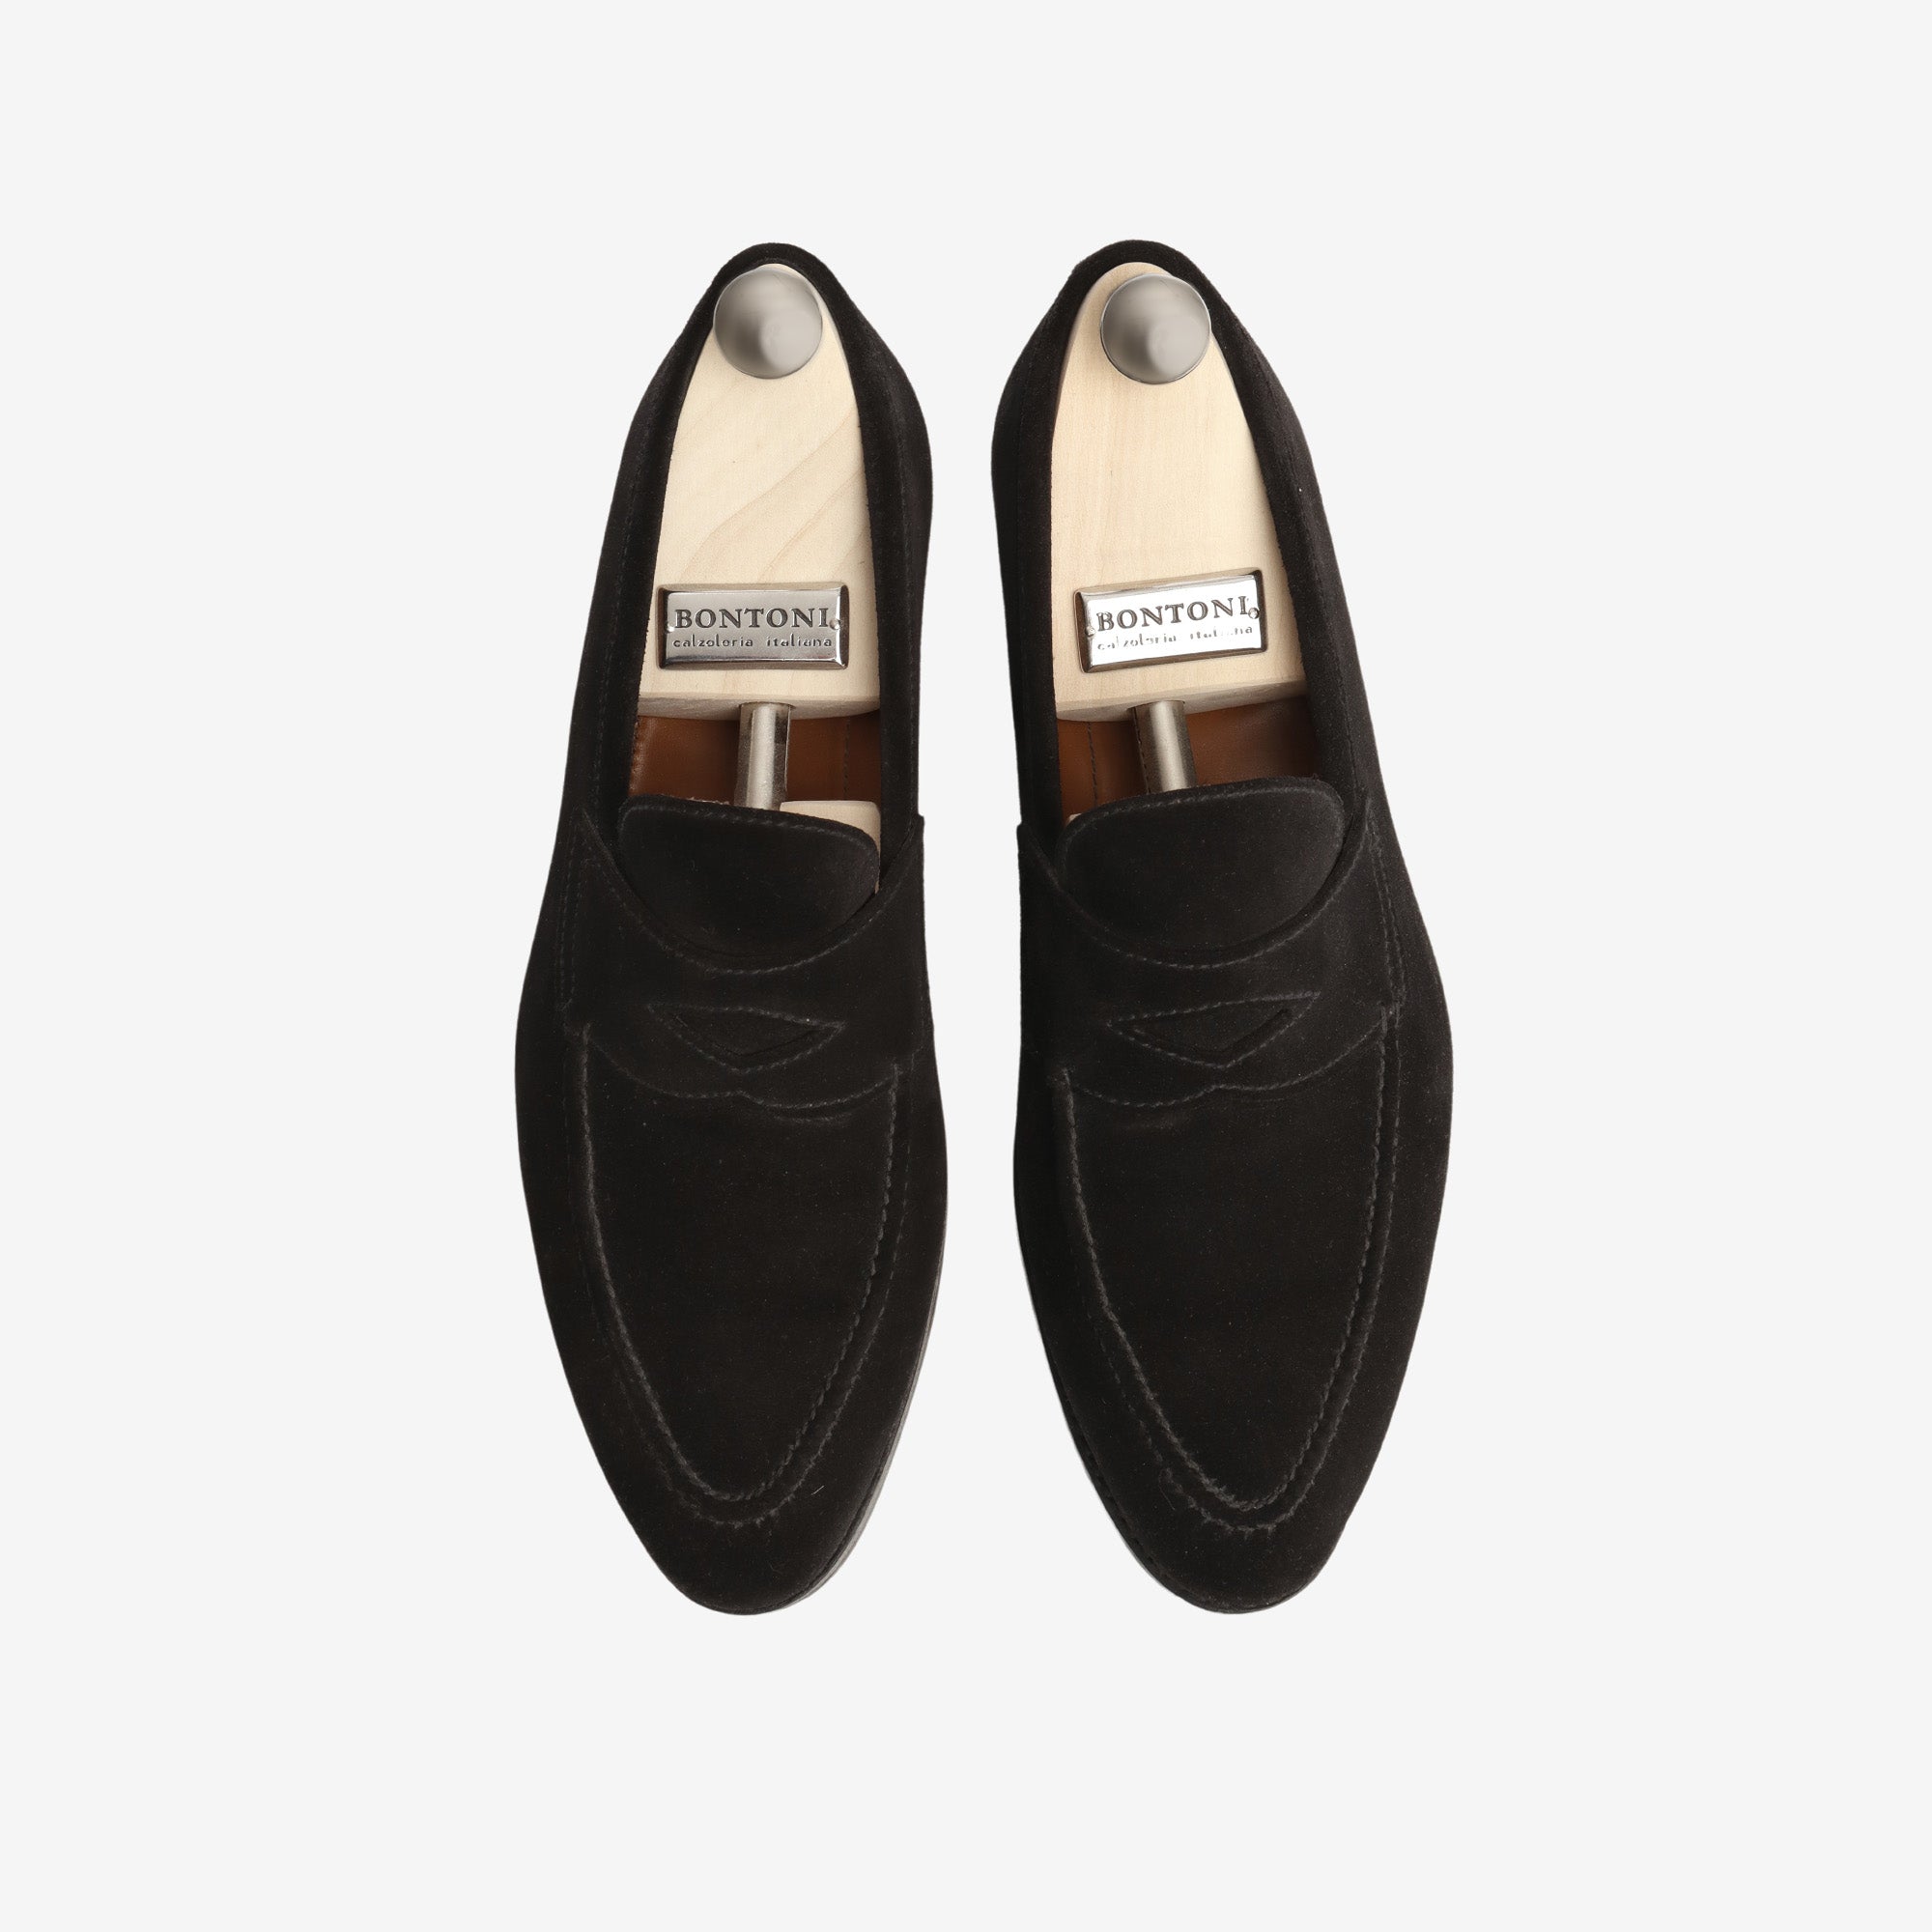 Suede Penny Loafer (+ Shoe Trees)